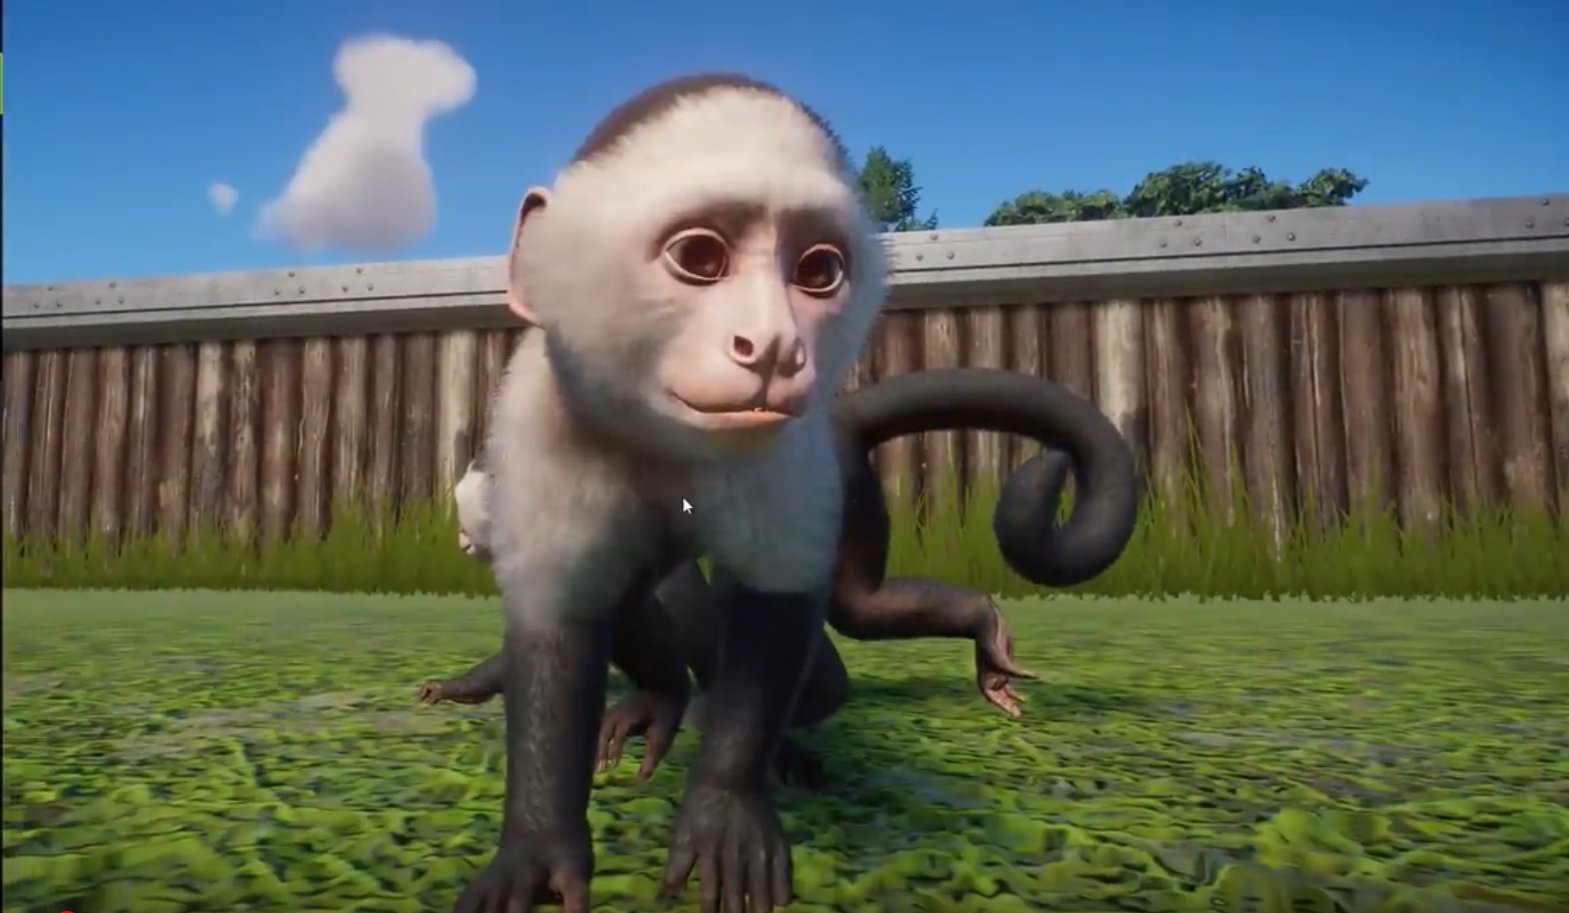 The Zoo Simulator Planet Zoo Just Received Its South America DLC Expansion